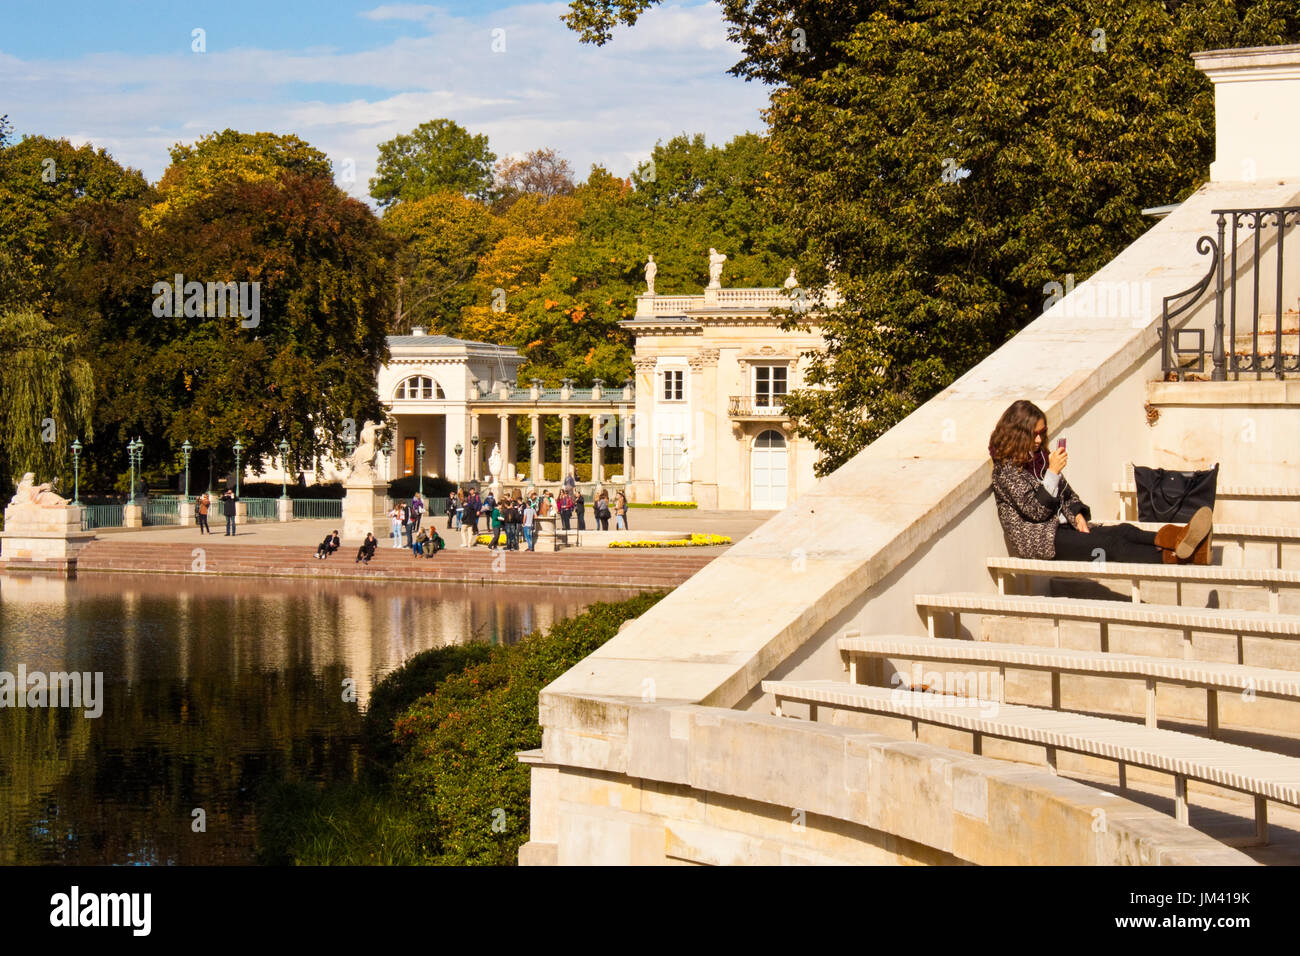 Warsaw, Poland - October 2, 2014: Young girl relaxing on a bench of The Amphitheatre in Lazienki Krolewskie park (Royal Baths park), the Water Palace  Stock Photo